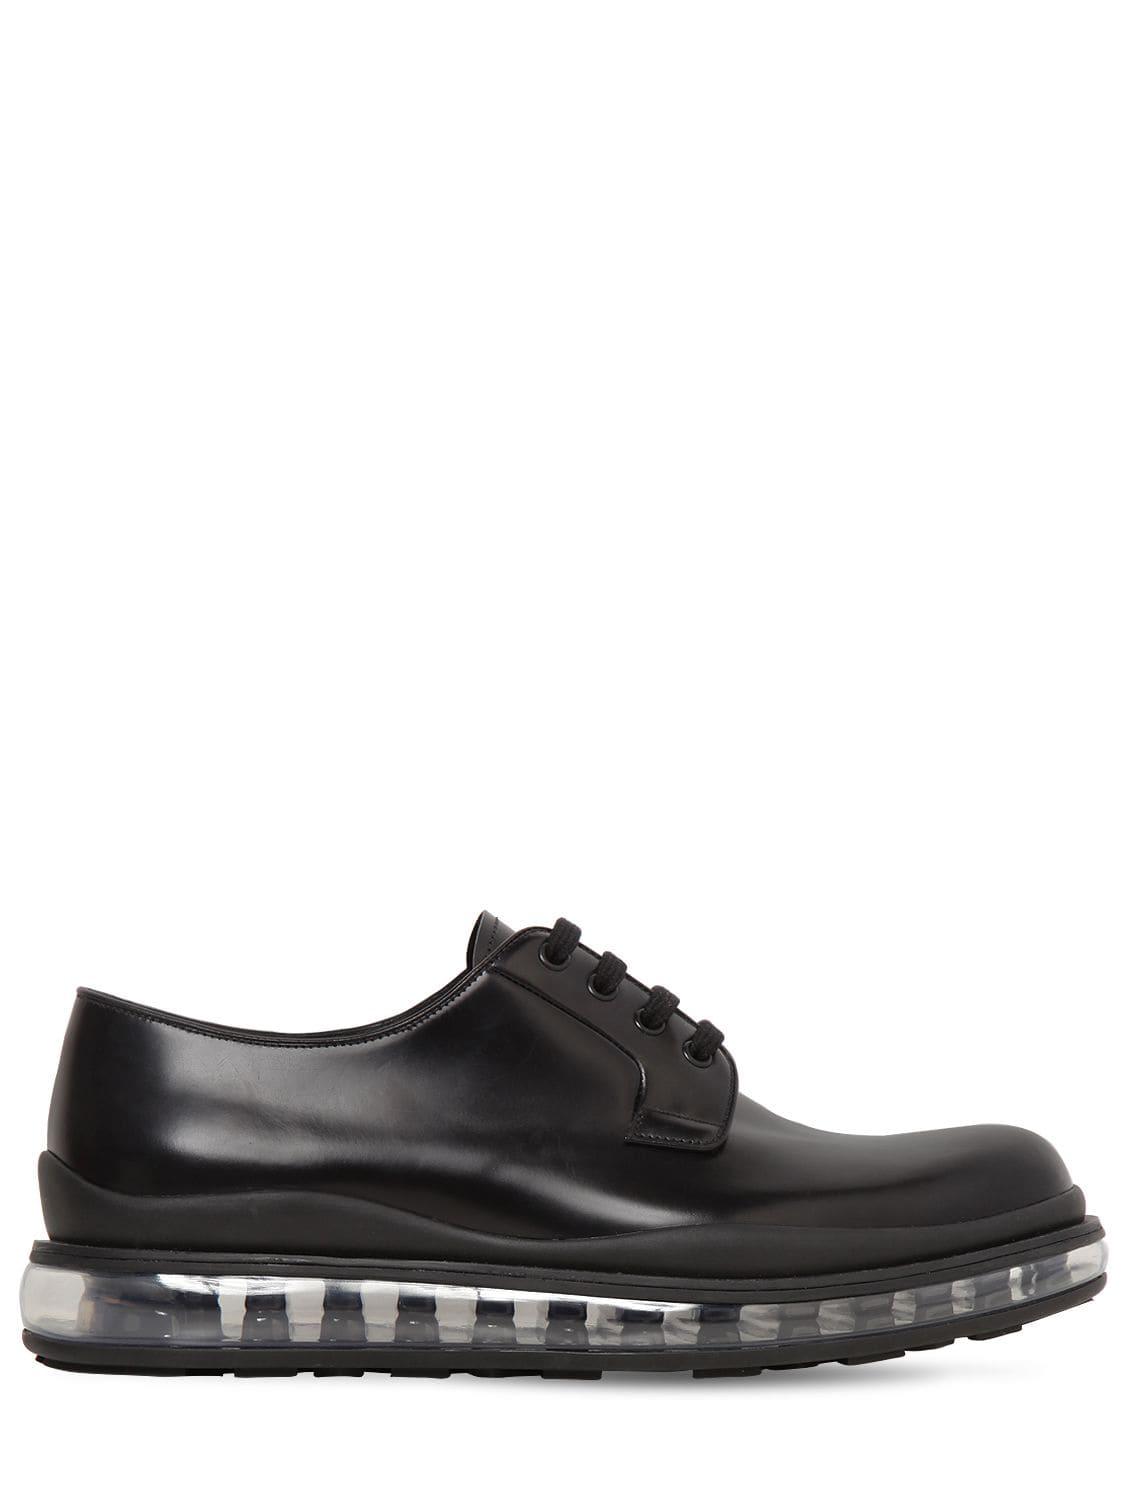 Prada Levitate Brushed Leather Derby Shoes in Black for Men - Lyst